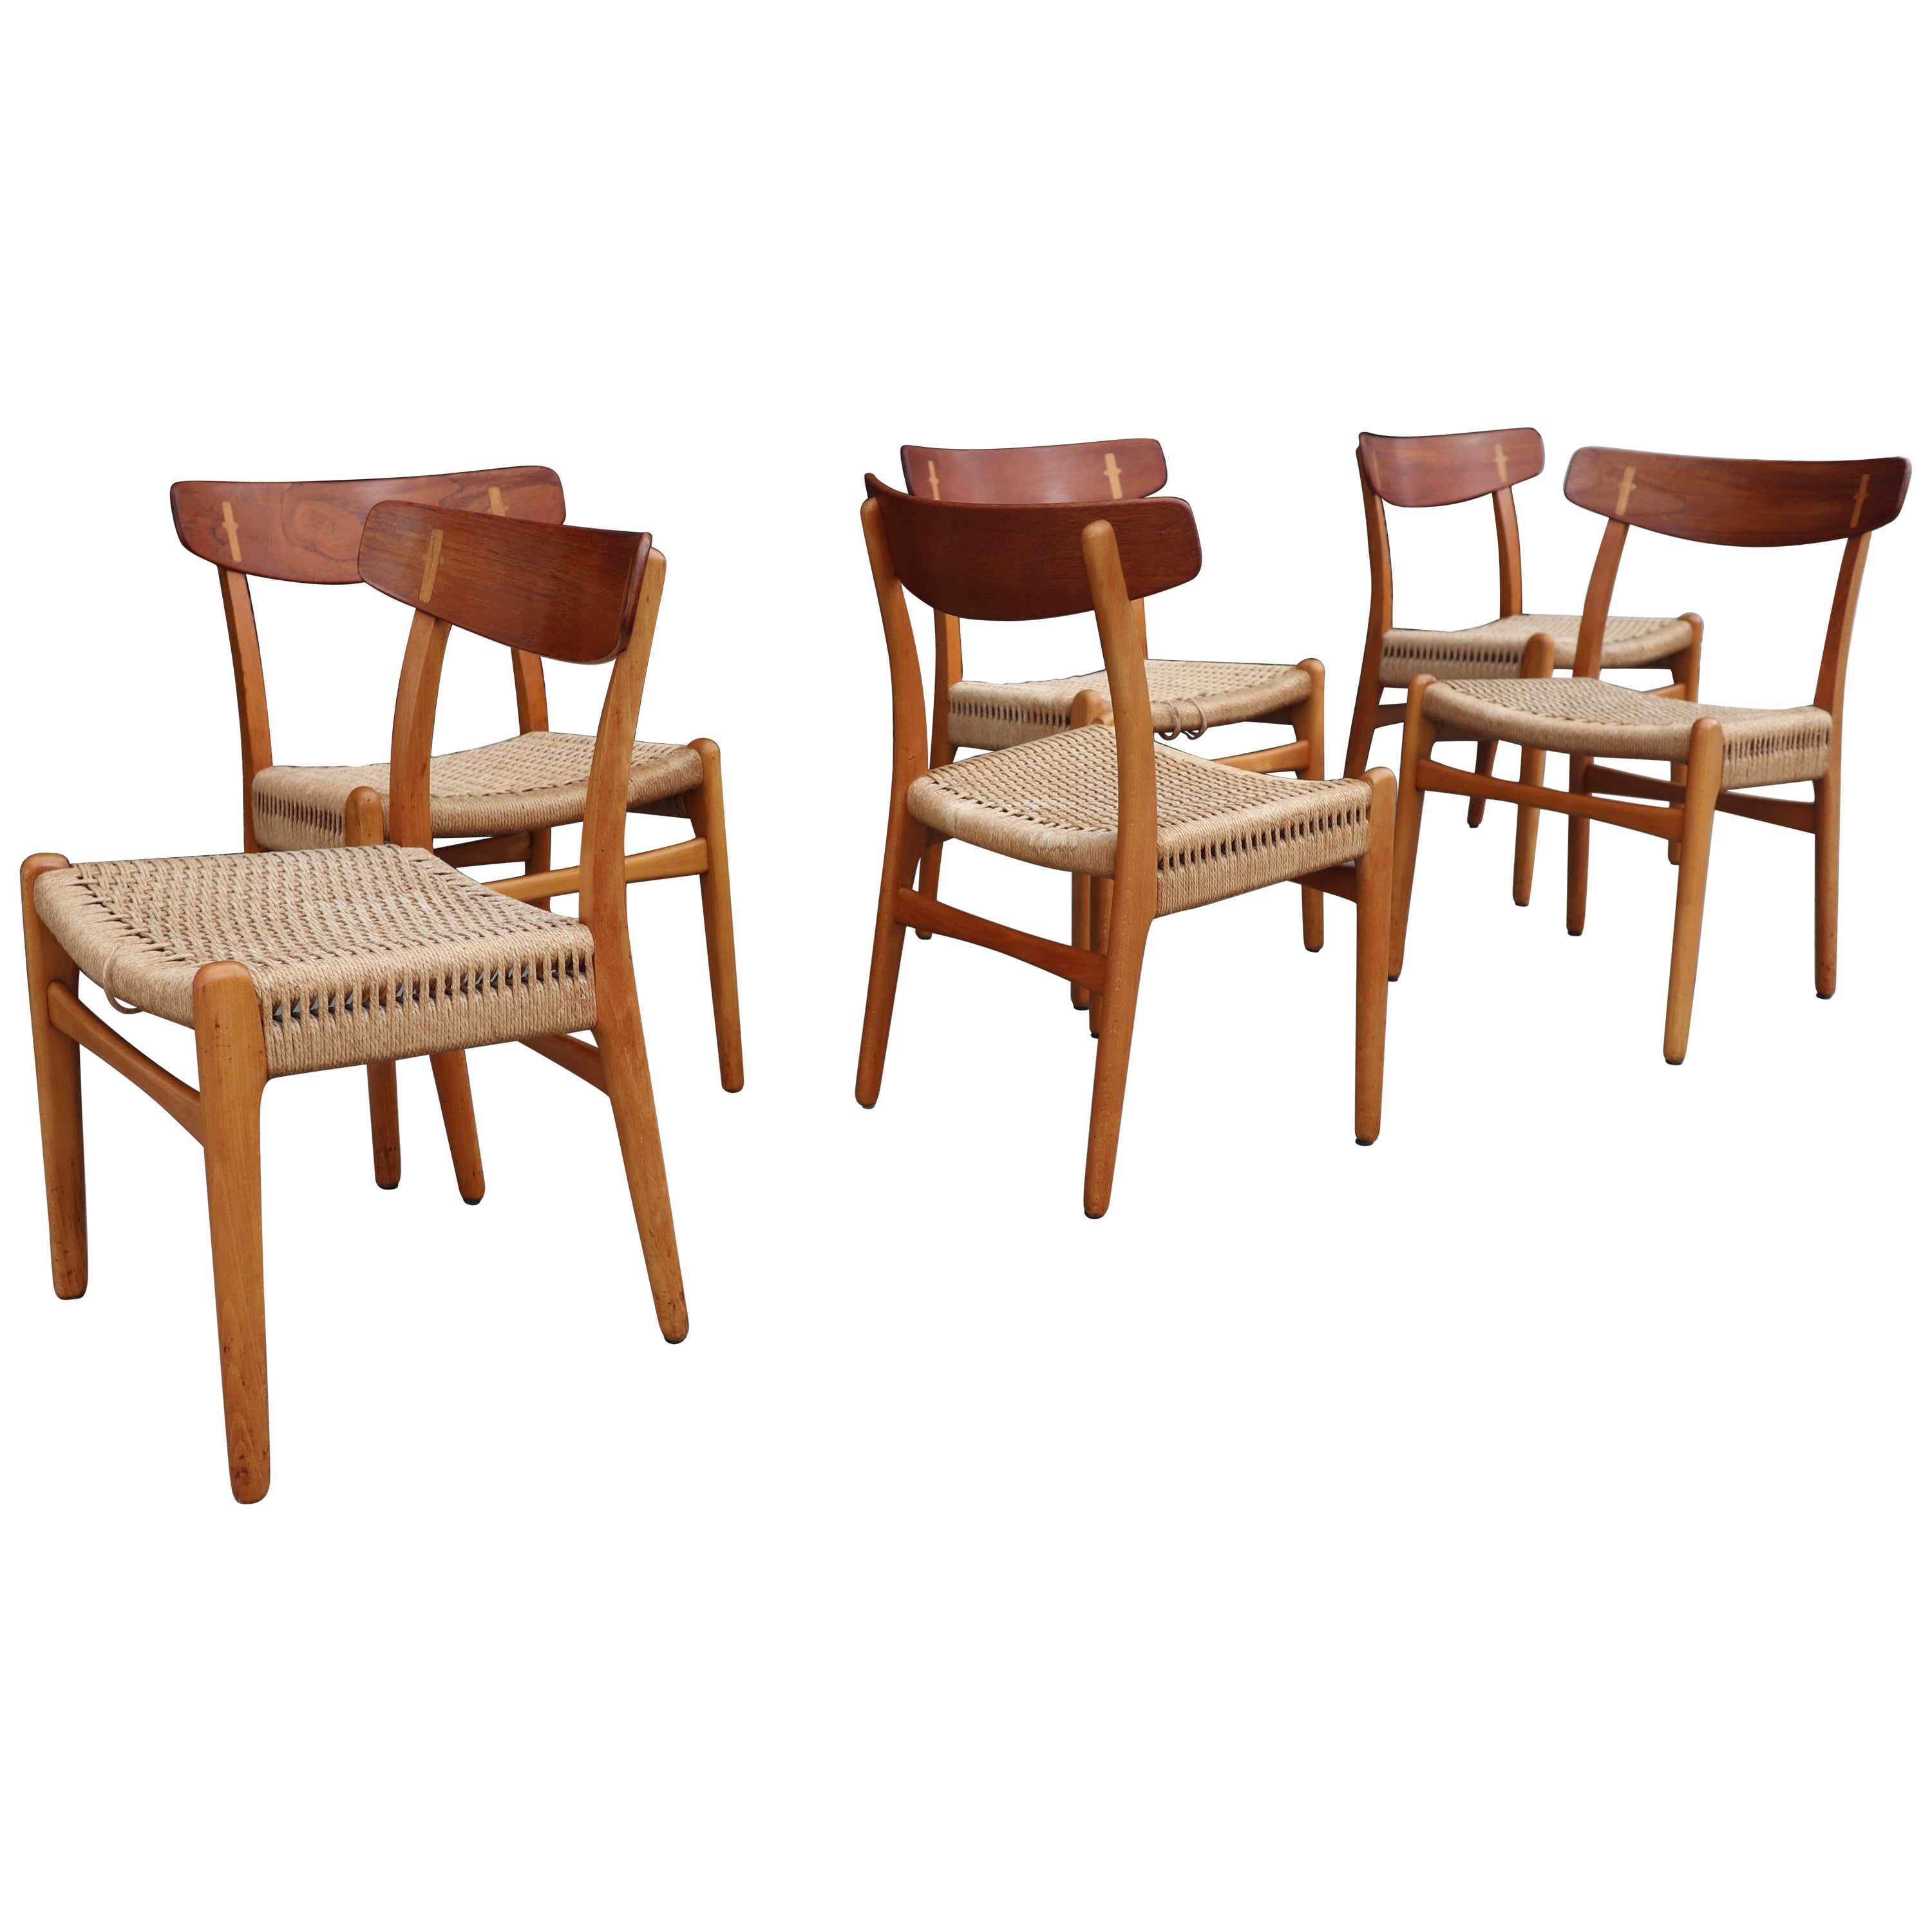 Vintage 1960s Set of 6 ch23 model dining chairs by Hans J. Wegner